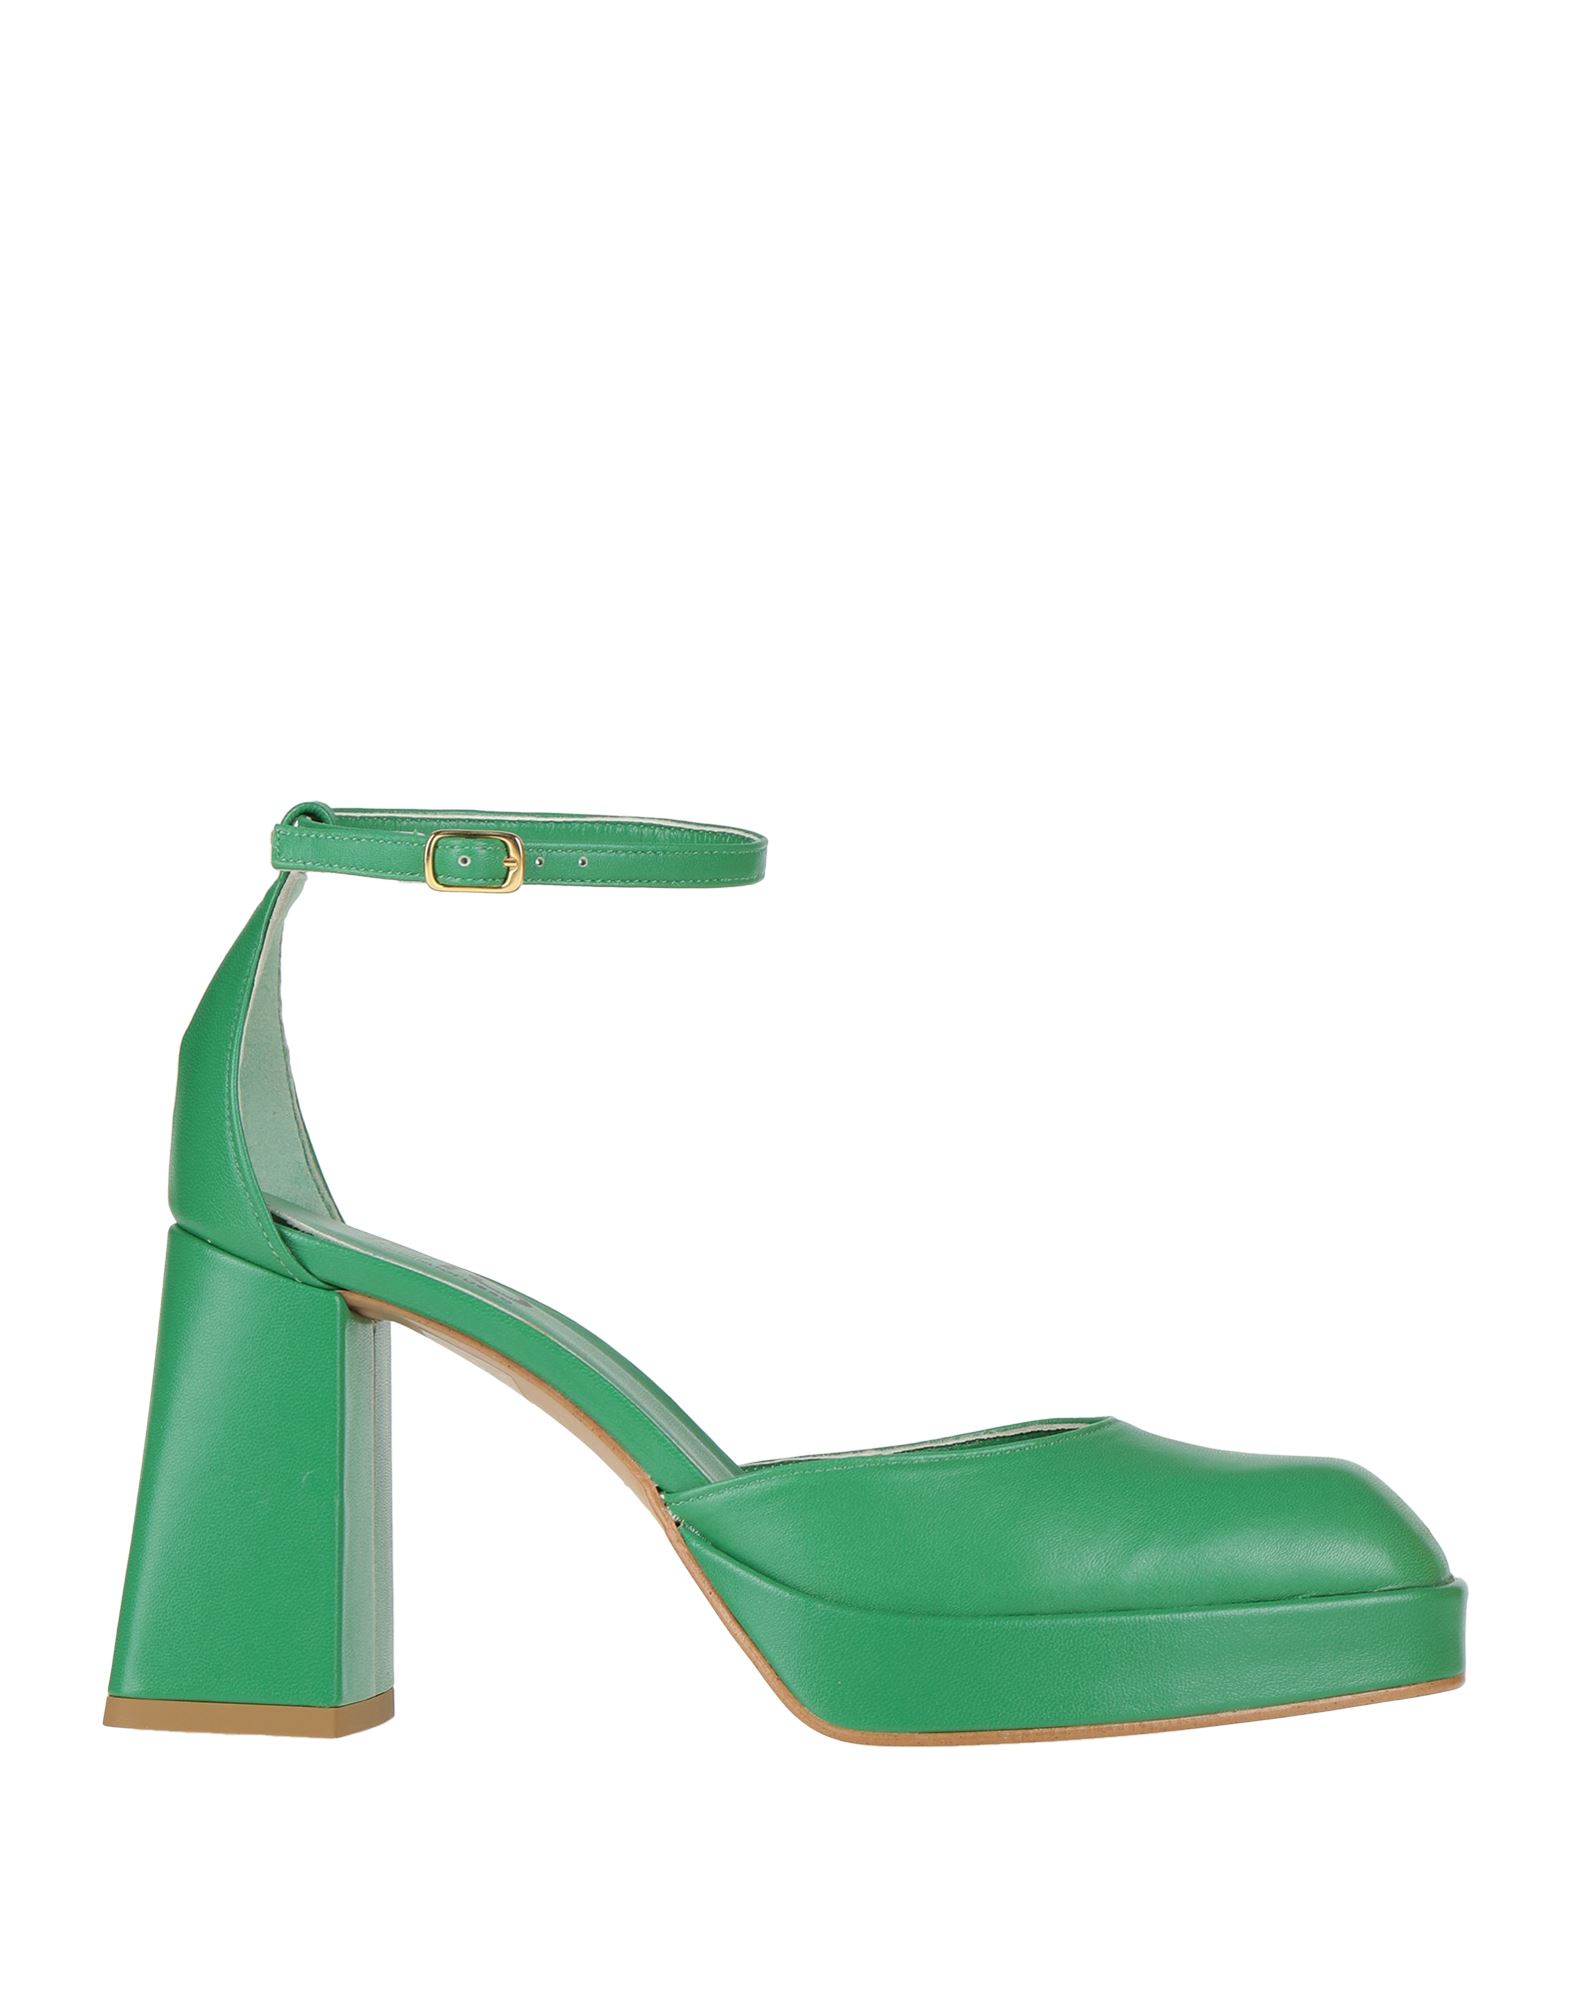 Islo Isabella Lorusso Pumps In Green